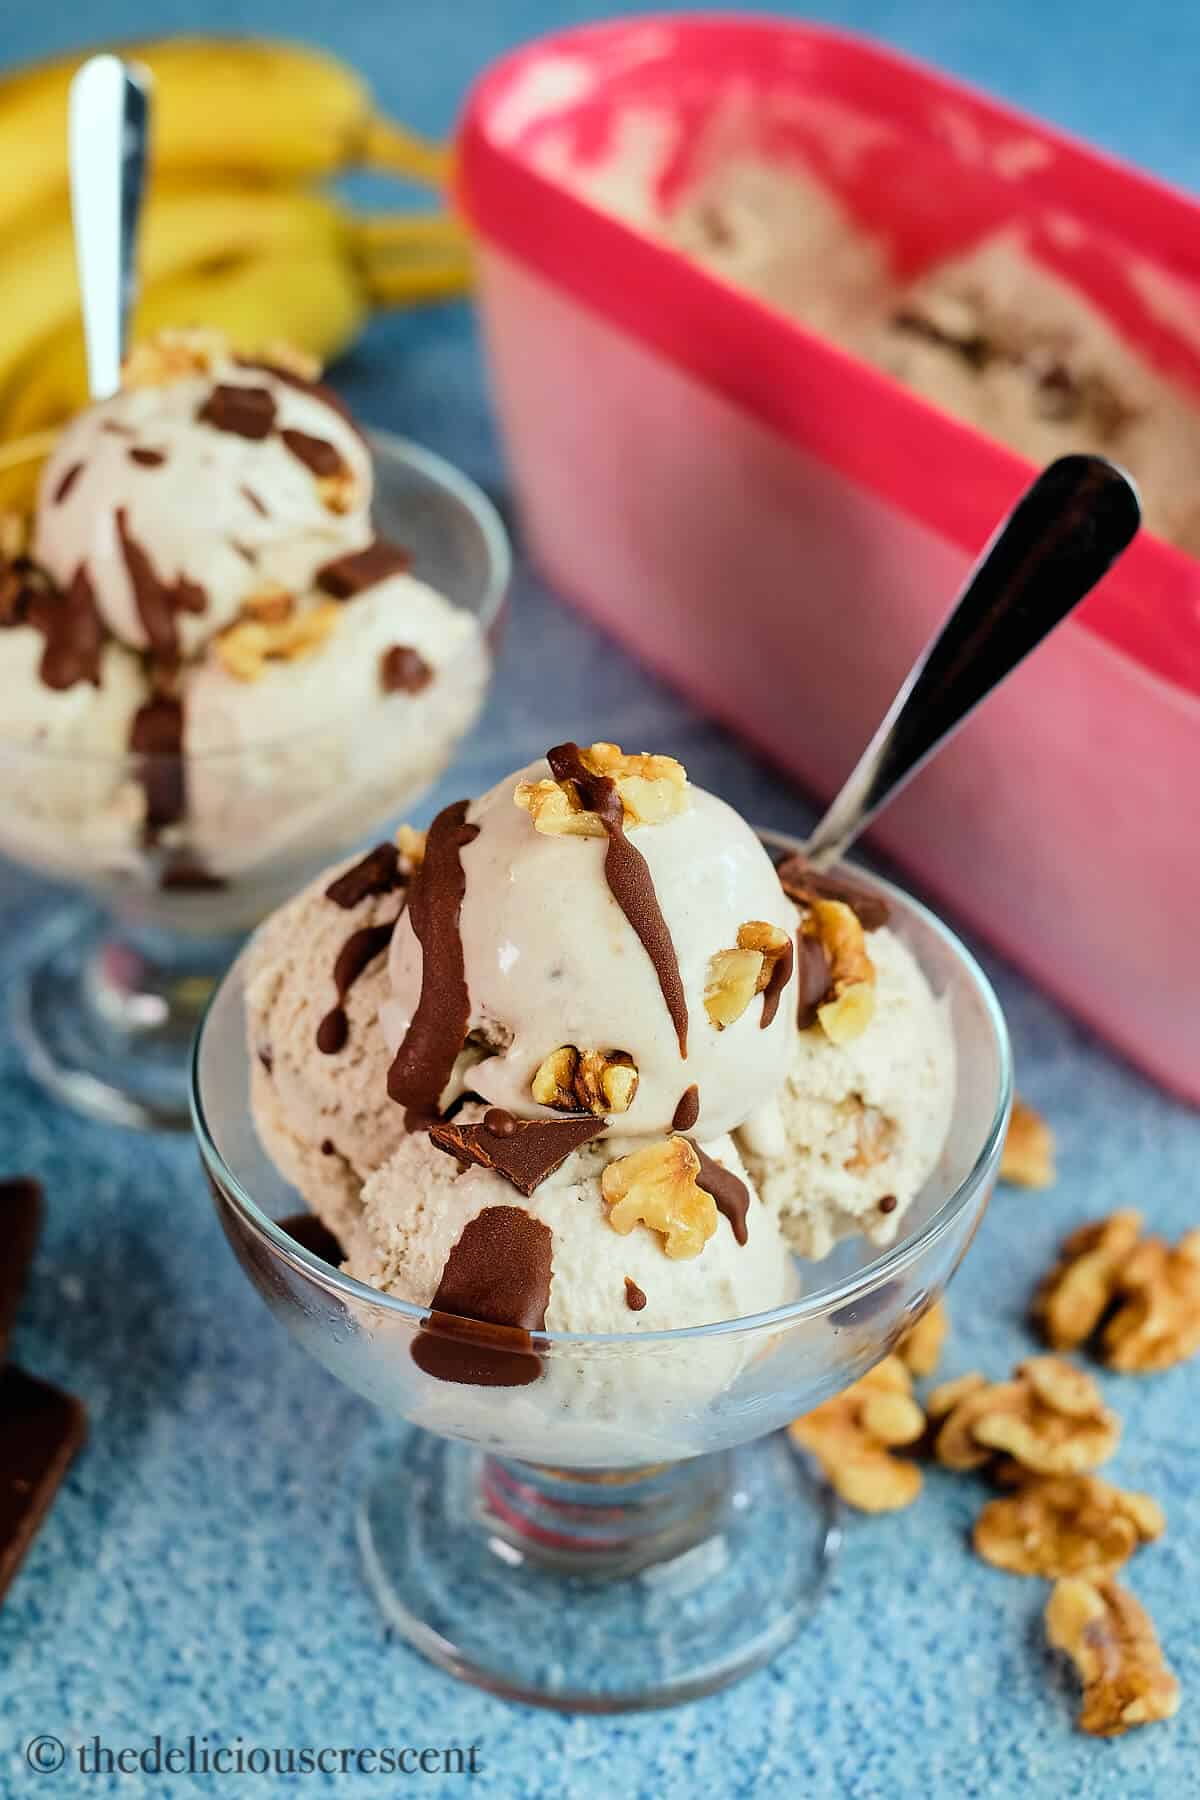 Scoops of banana nut ice cream in a cup.